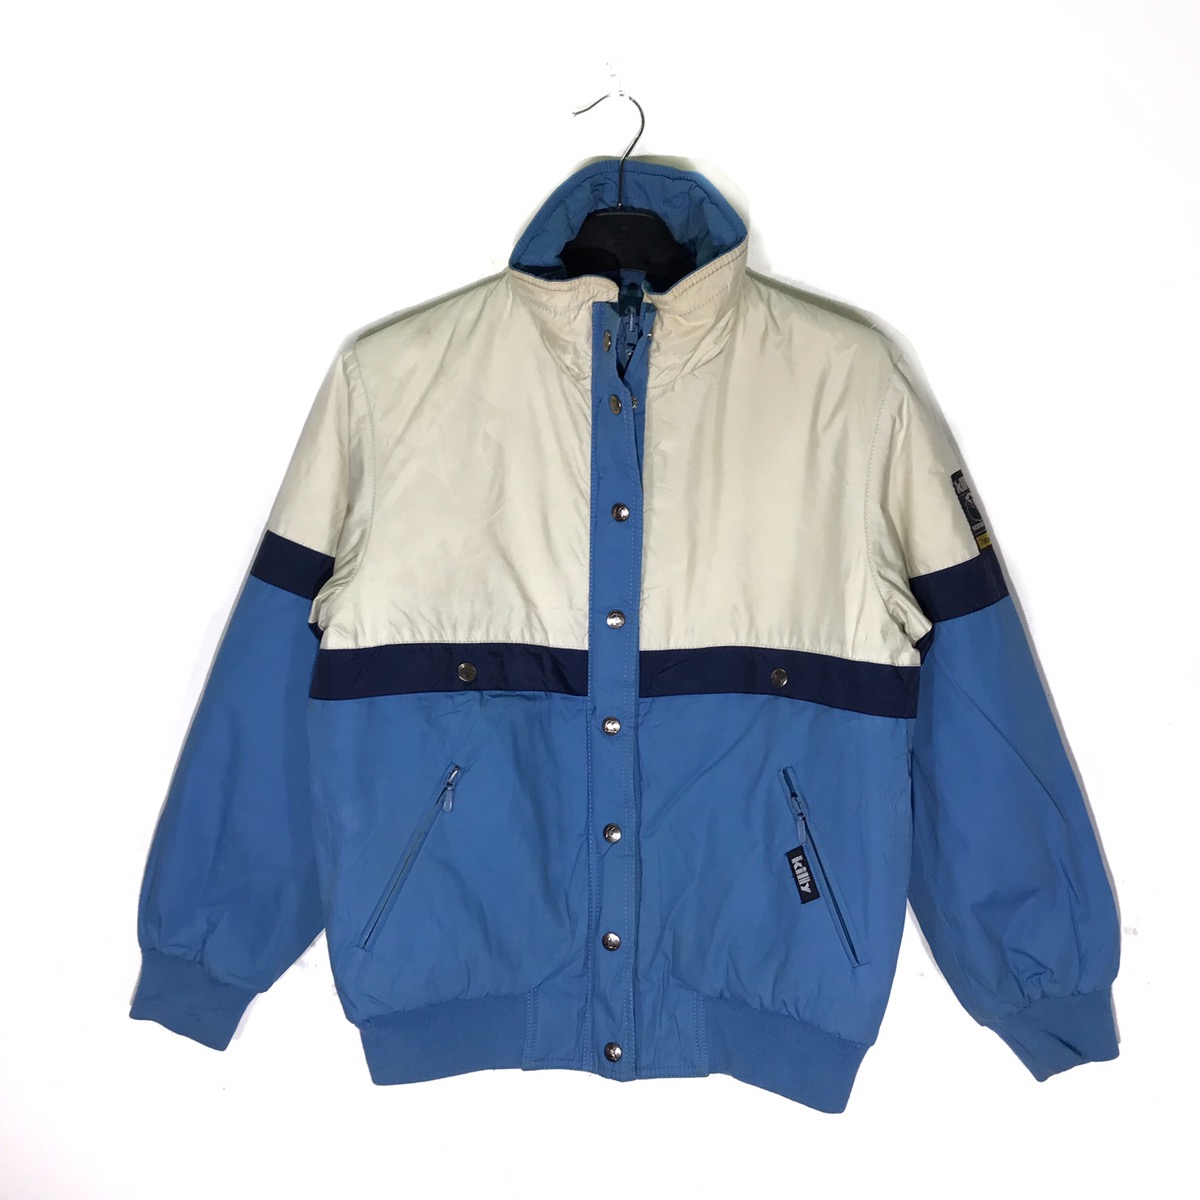 Made In Japan Vintage Killy Colorblock Ski Jacket by Asics - 1